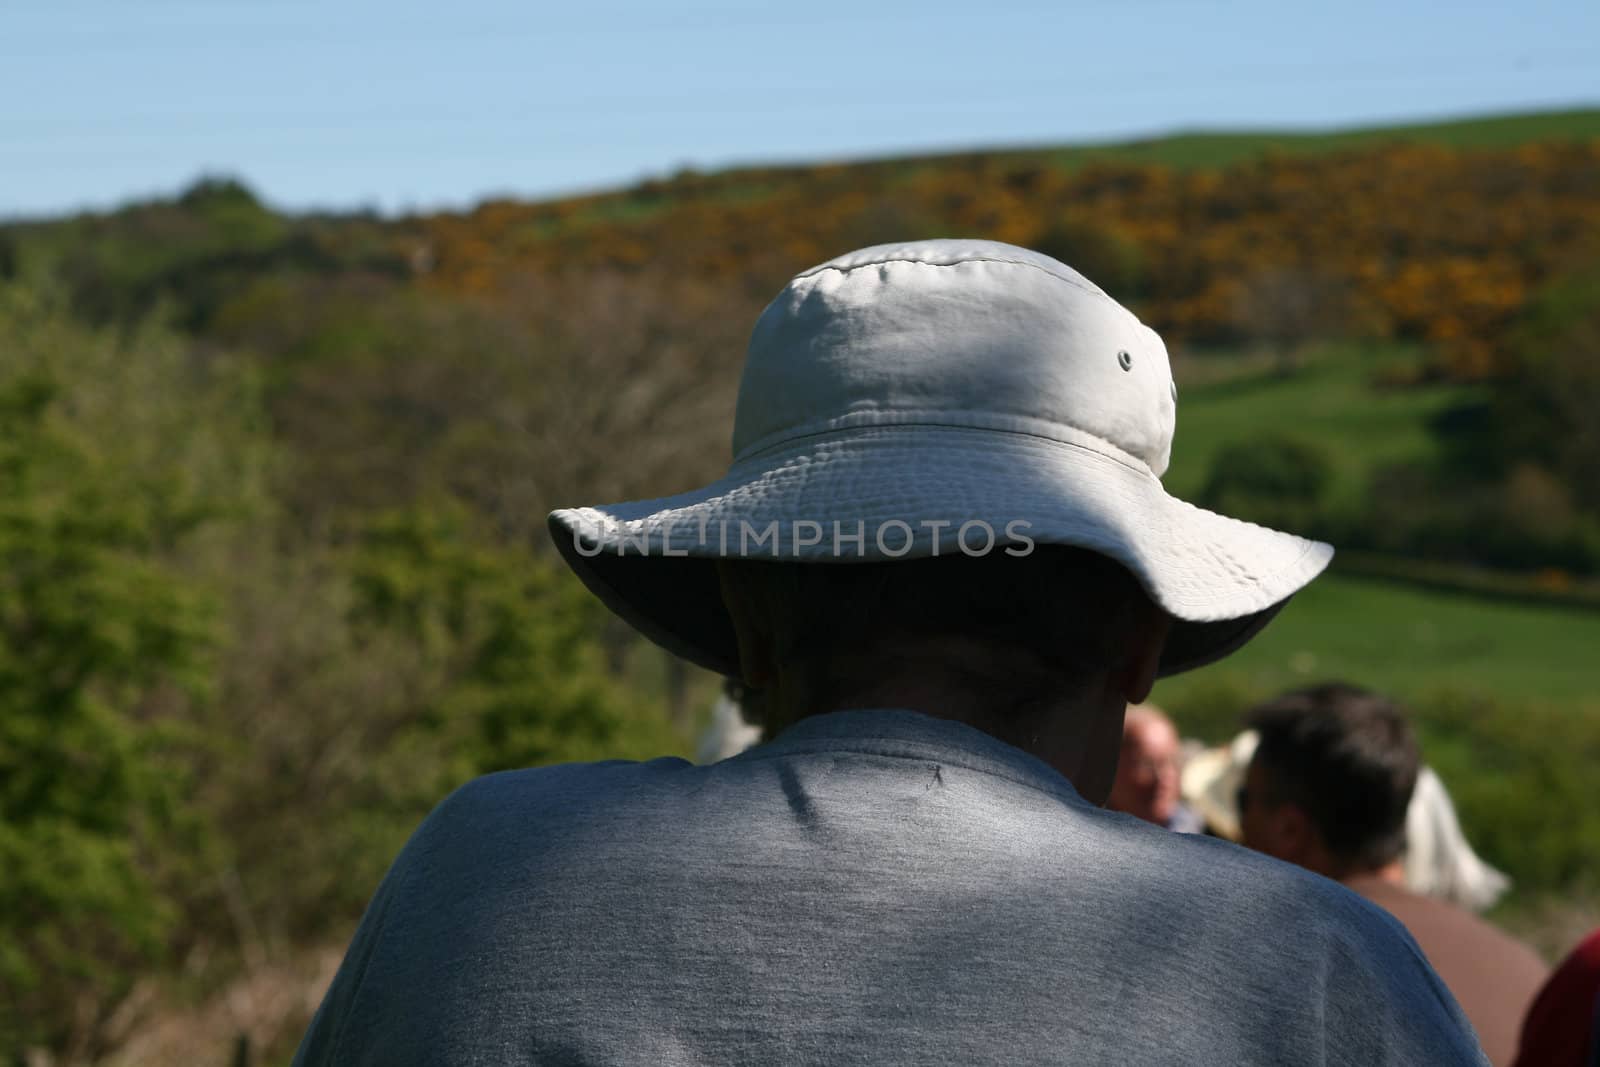 a sun hat for protection against the sun keeping this man in the shade